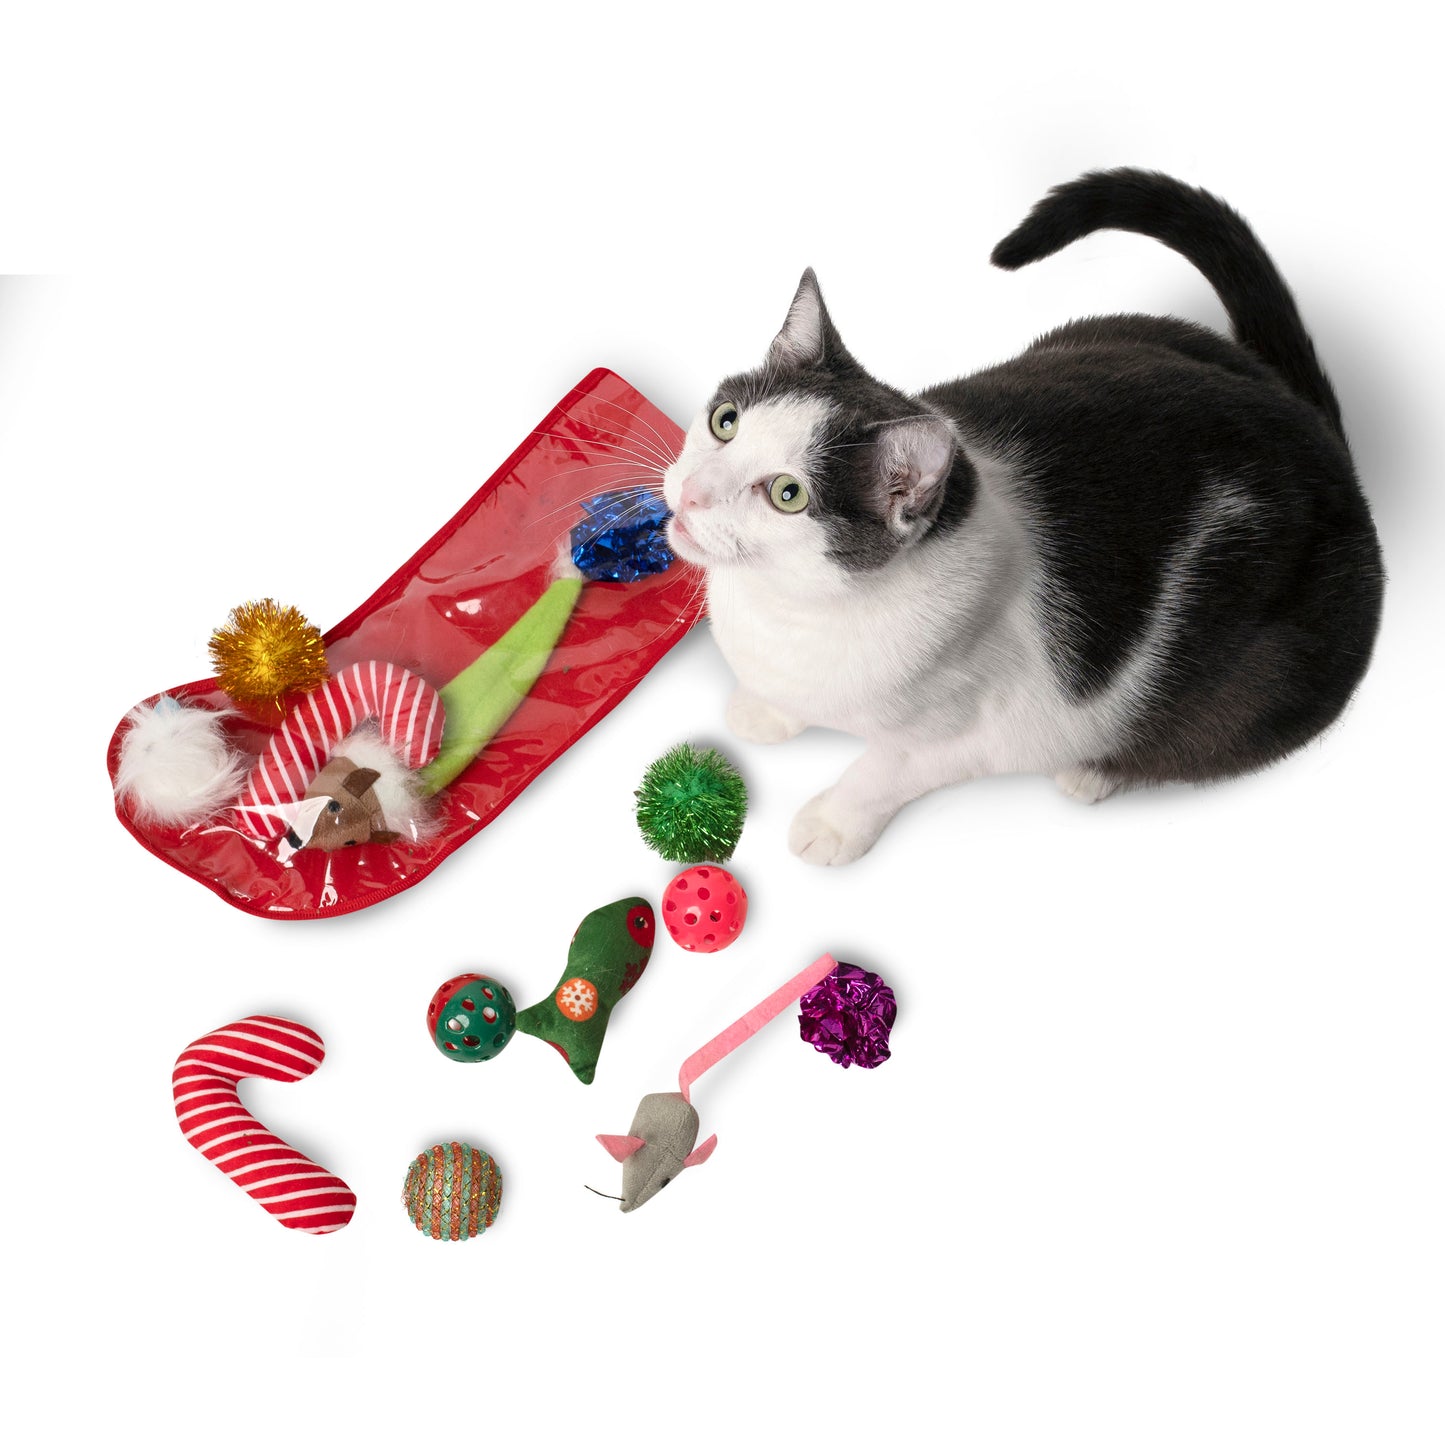 Midlee Christmas Stocking Cat Toy Gift Set (14 Toys)- Candy Canes, Bells, Mice Kitten Holiday Toys